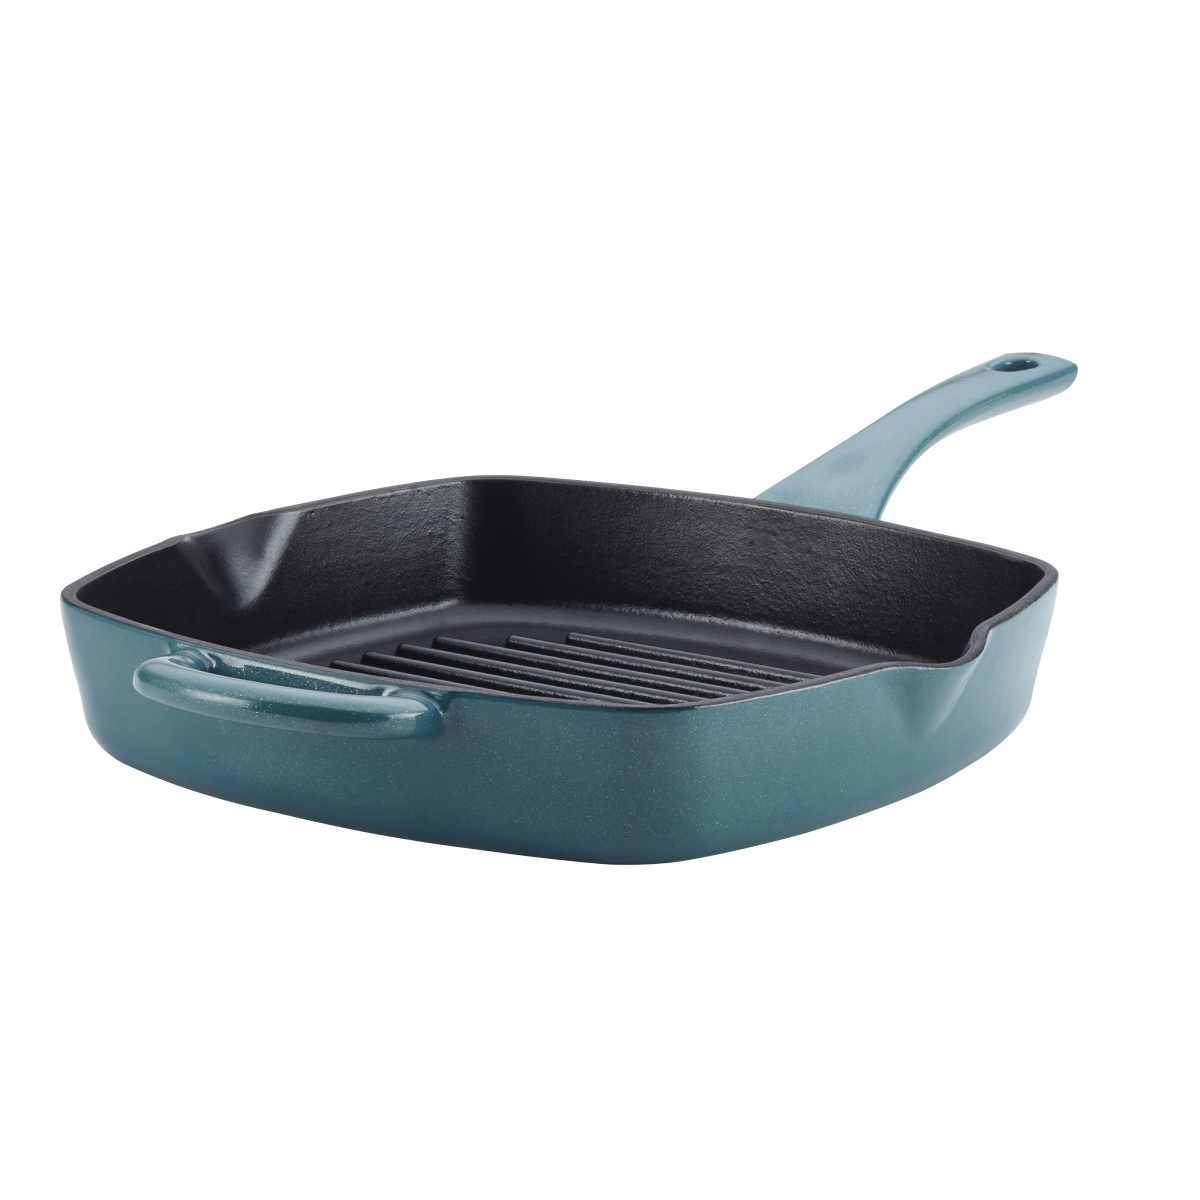 46963 Cast Iron Square Grill Pan With Pour Spouts, 10 In. - Twilight Teal